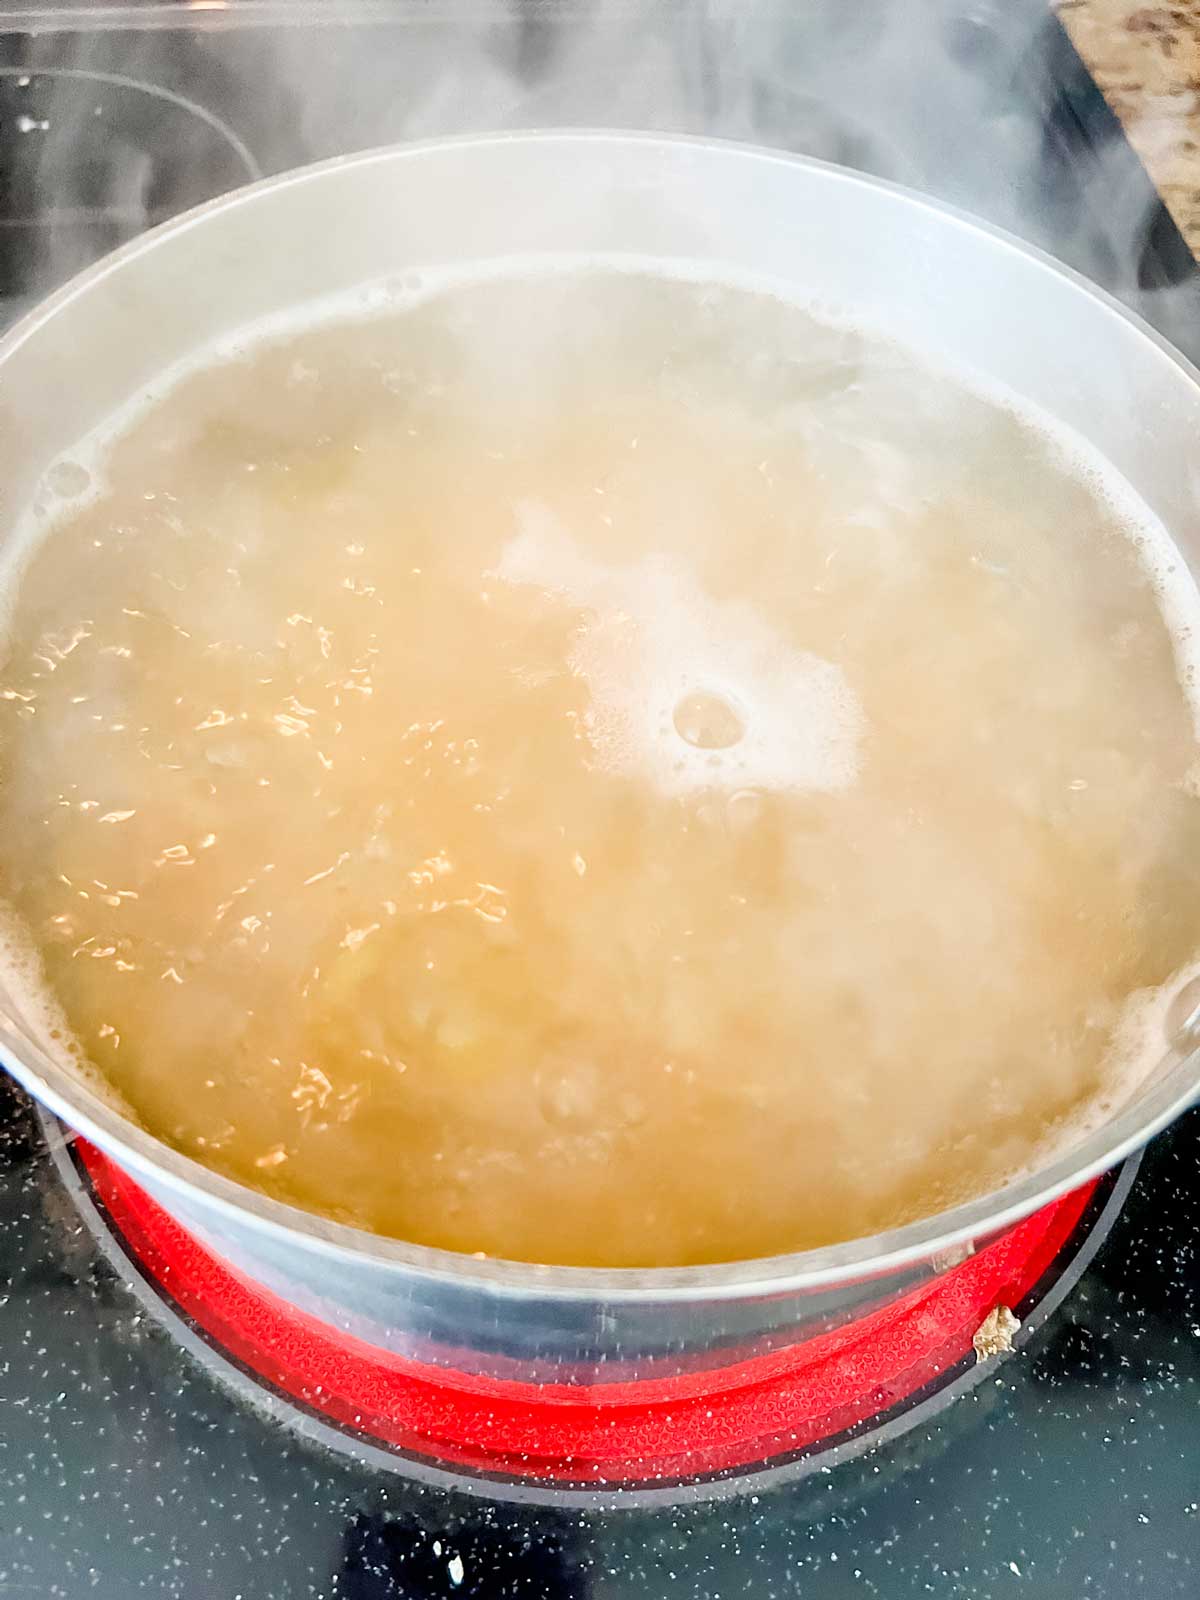 Pasta cooking in a pot on a stove.